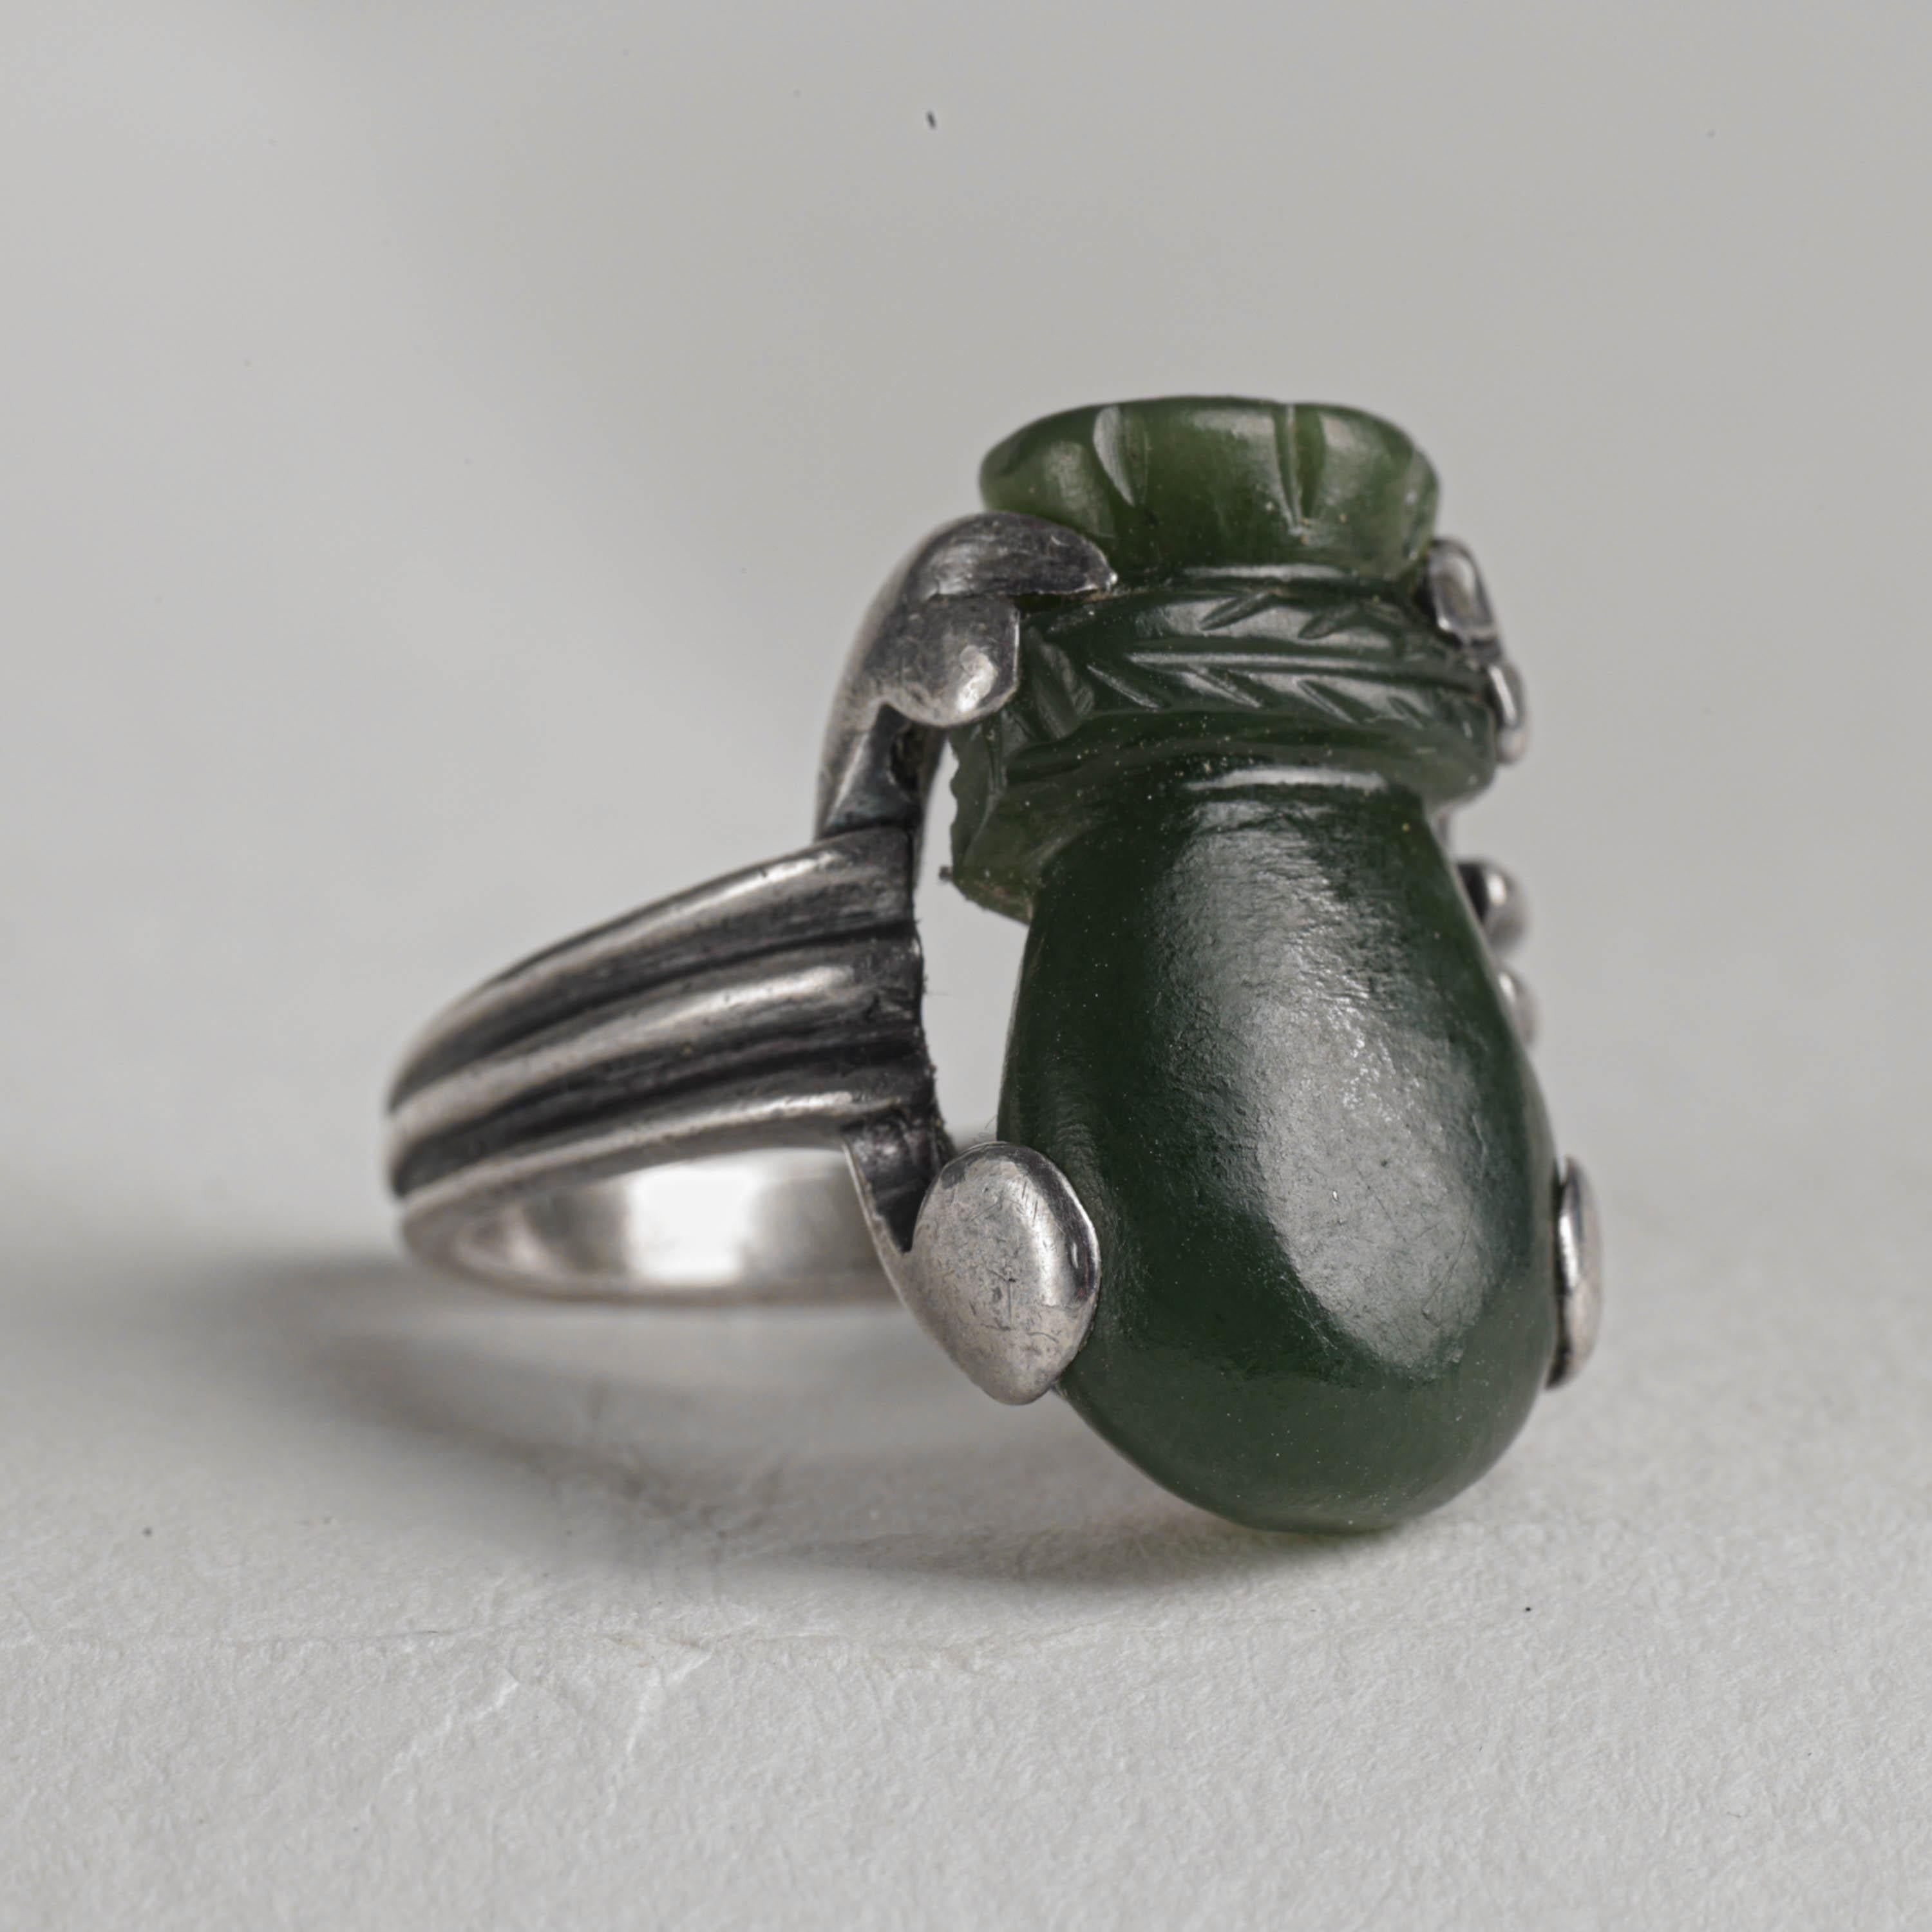 Uncut Antique Chinese Art Deco Nephrite Ring Certified Untreated, Exquisite Old-School For Sale